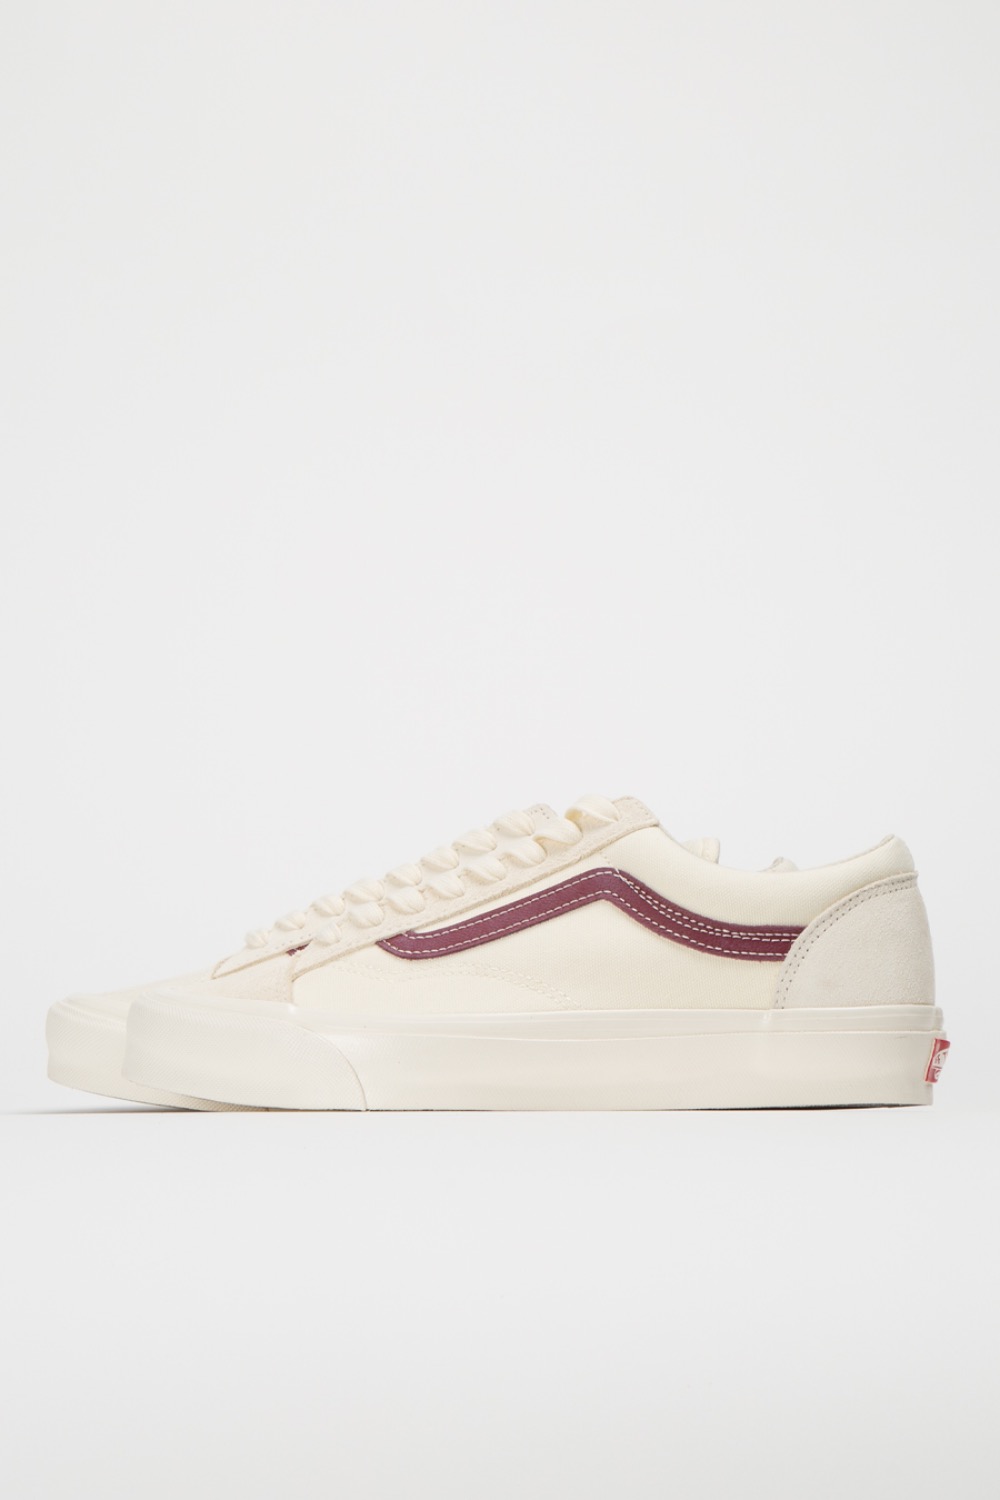 OG STYLE 36 LX(SUEDE/CANVAS) CLASSIC WHITE/POMEGRANATE